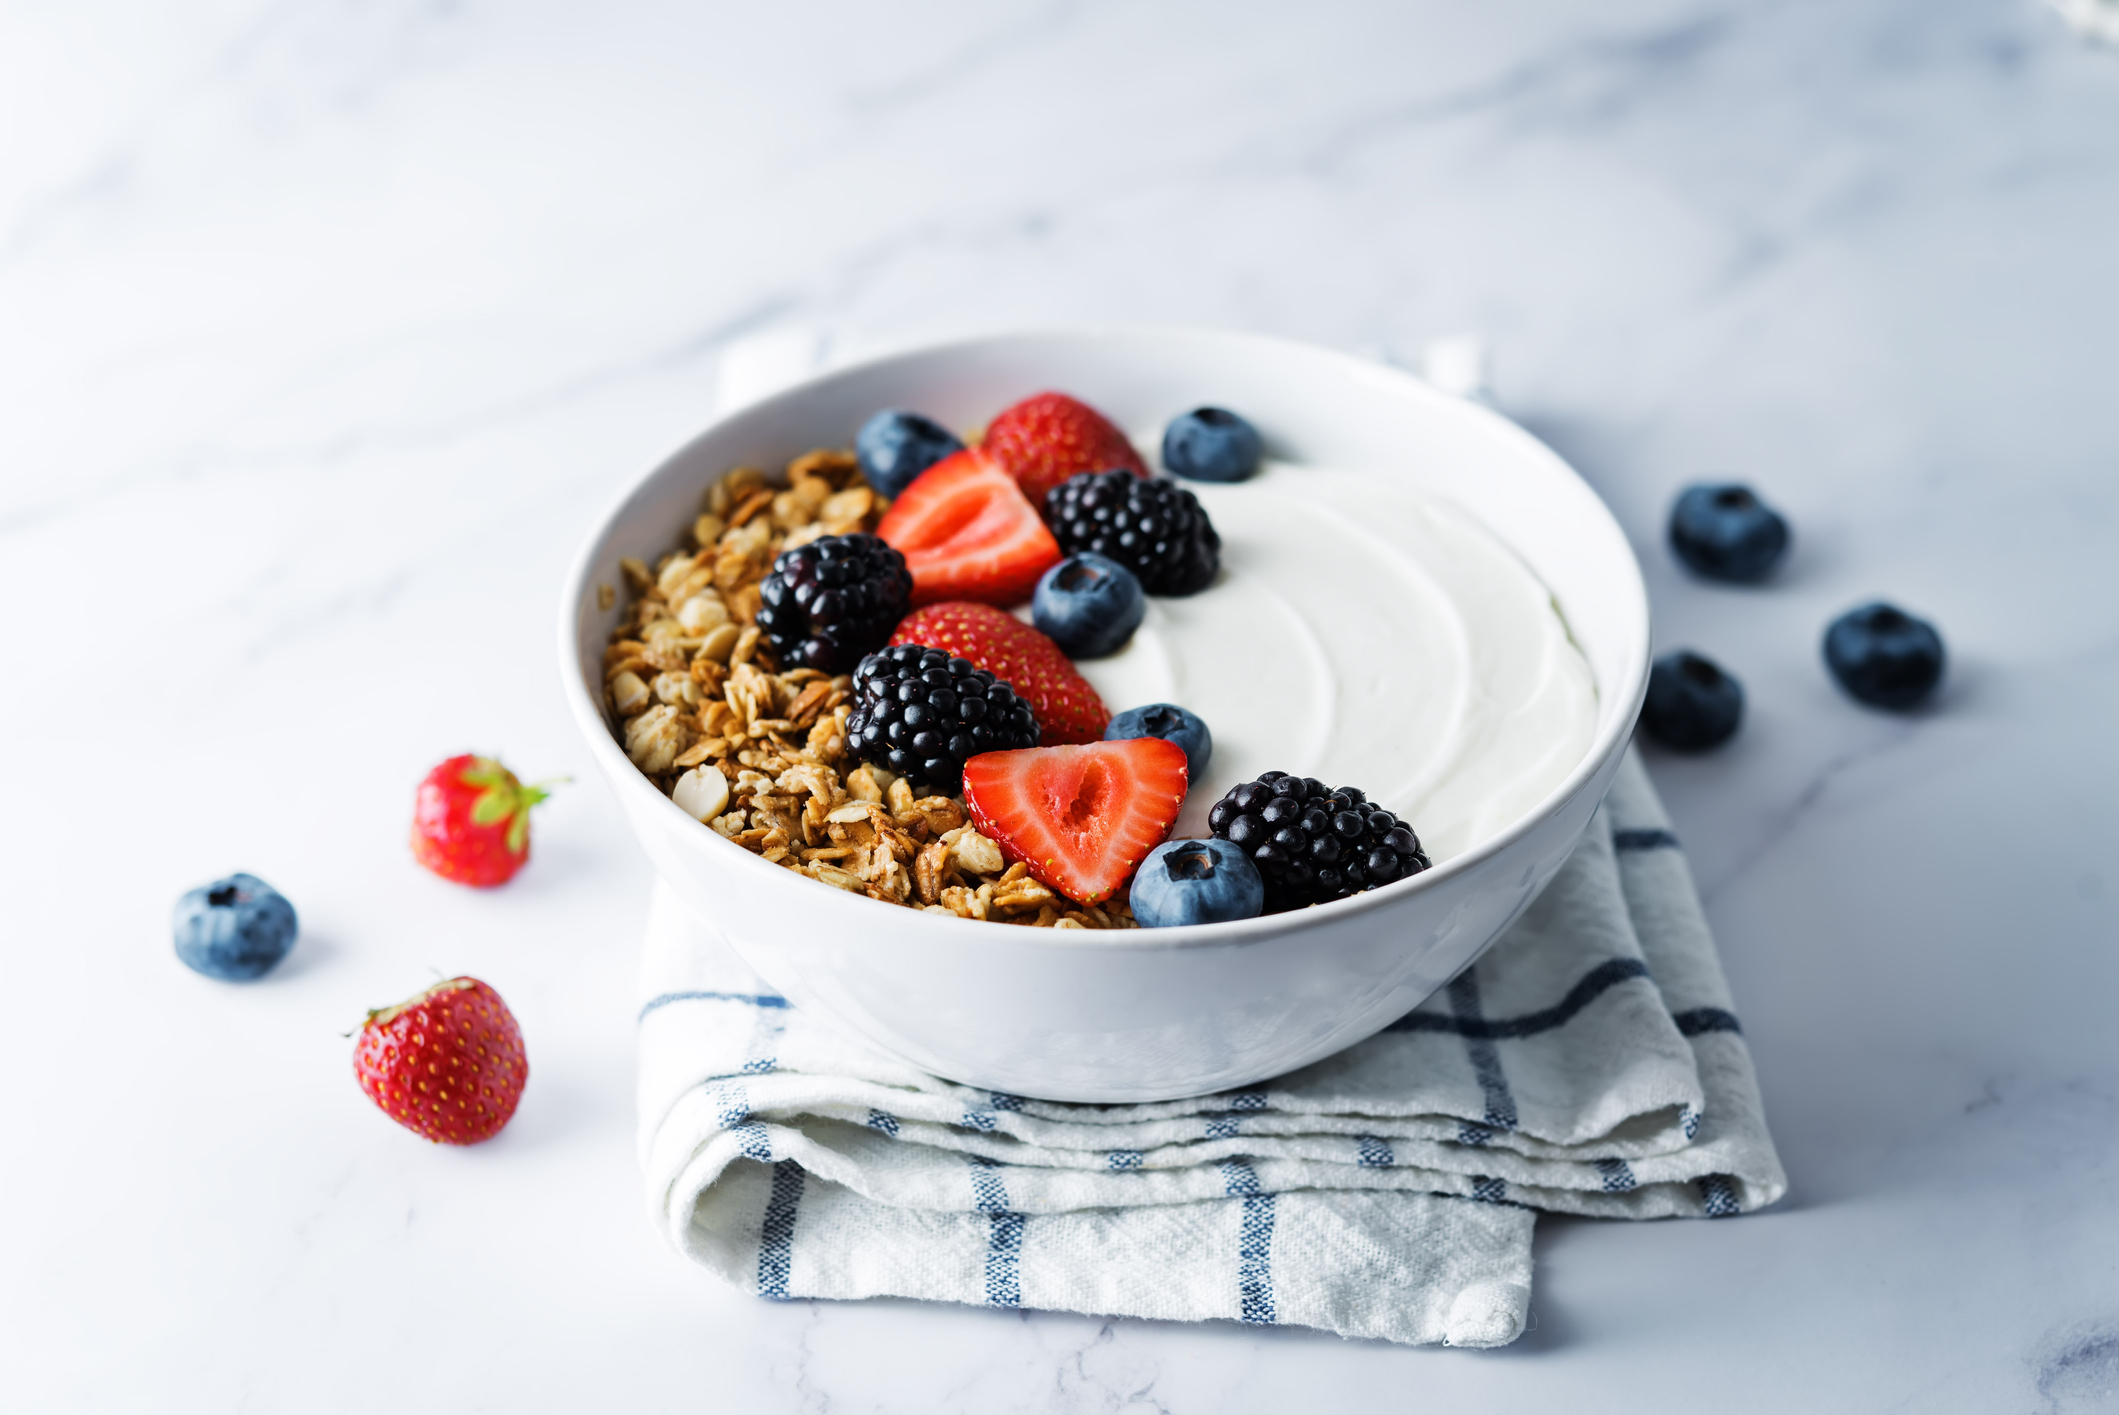 Greek yogurt for kids: Why It's Healthy and How to Serve It - Feed To ...